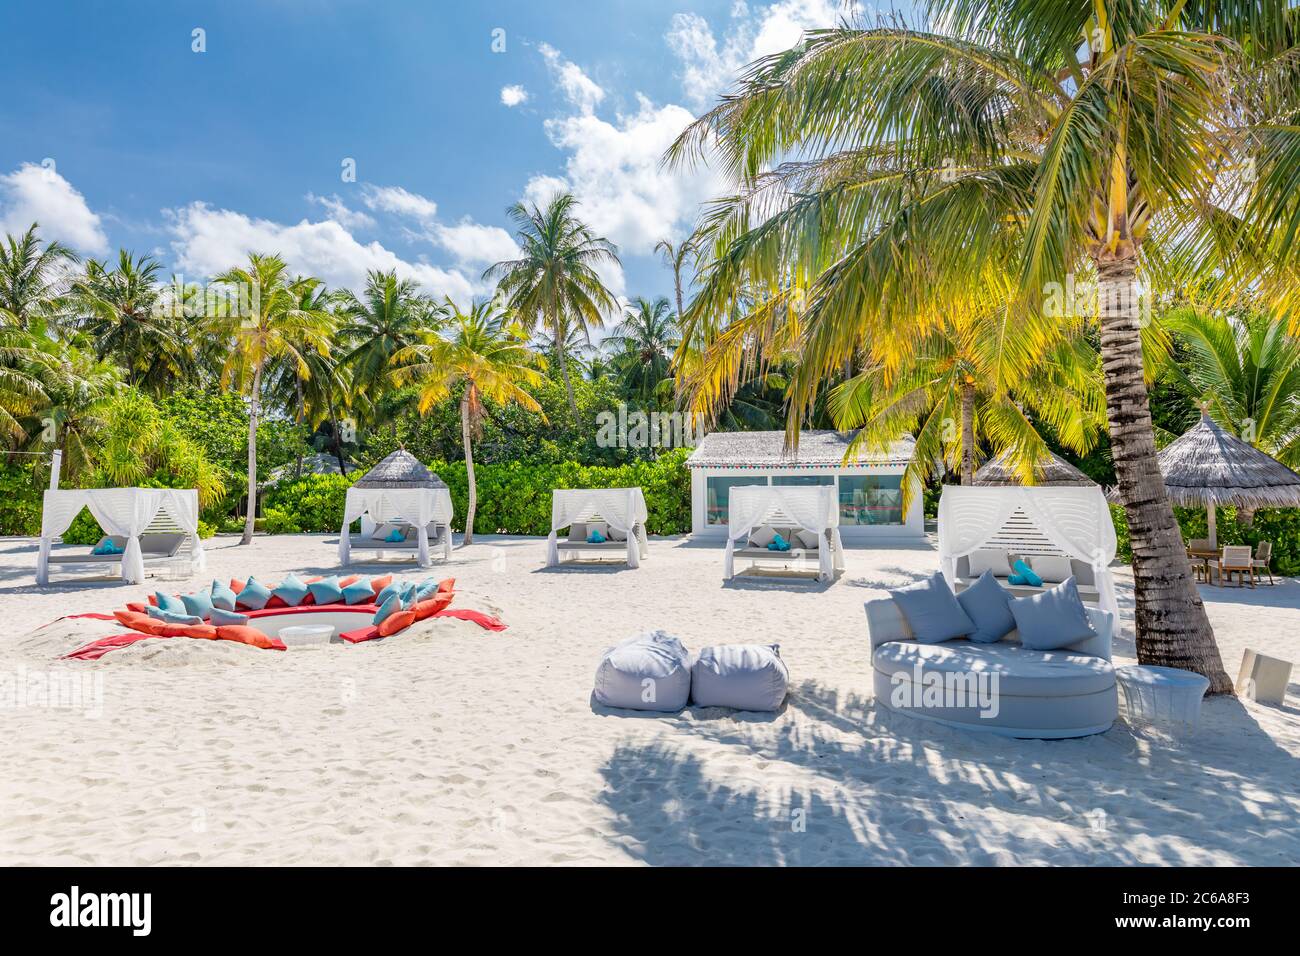 Comfortable chaise with canopy on vip beach seascape. Relaxation zone, tropical resort hotel beach landscape. Palm trees over white sand, vacation Stock Photo